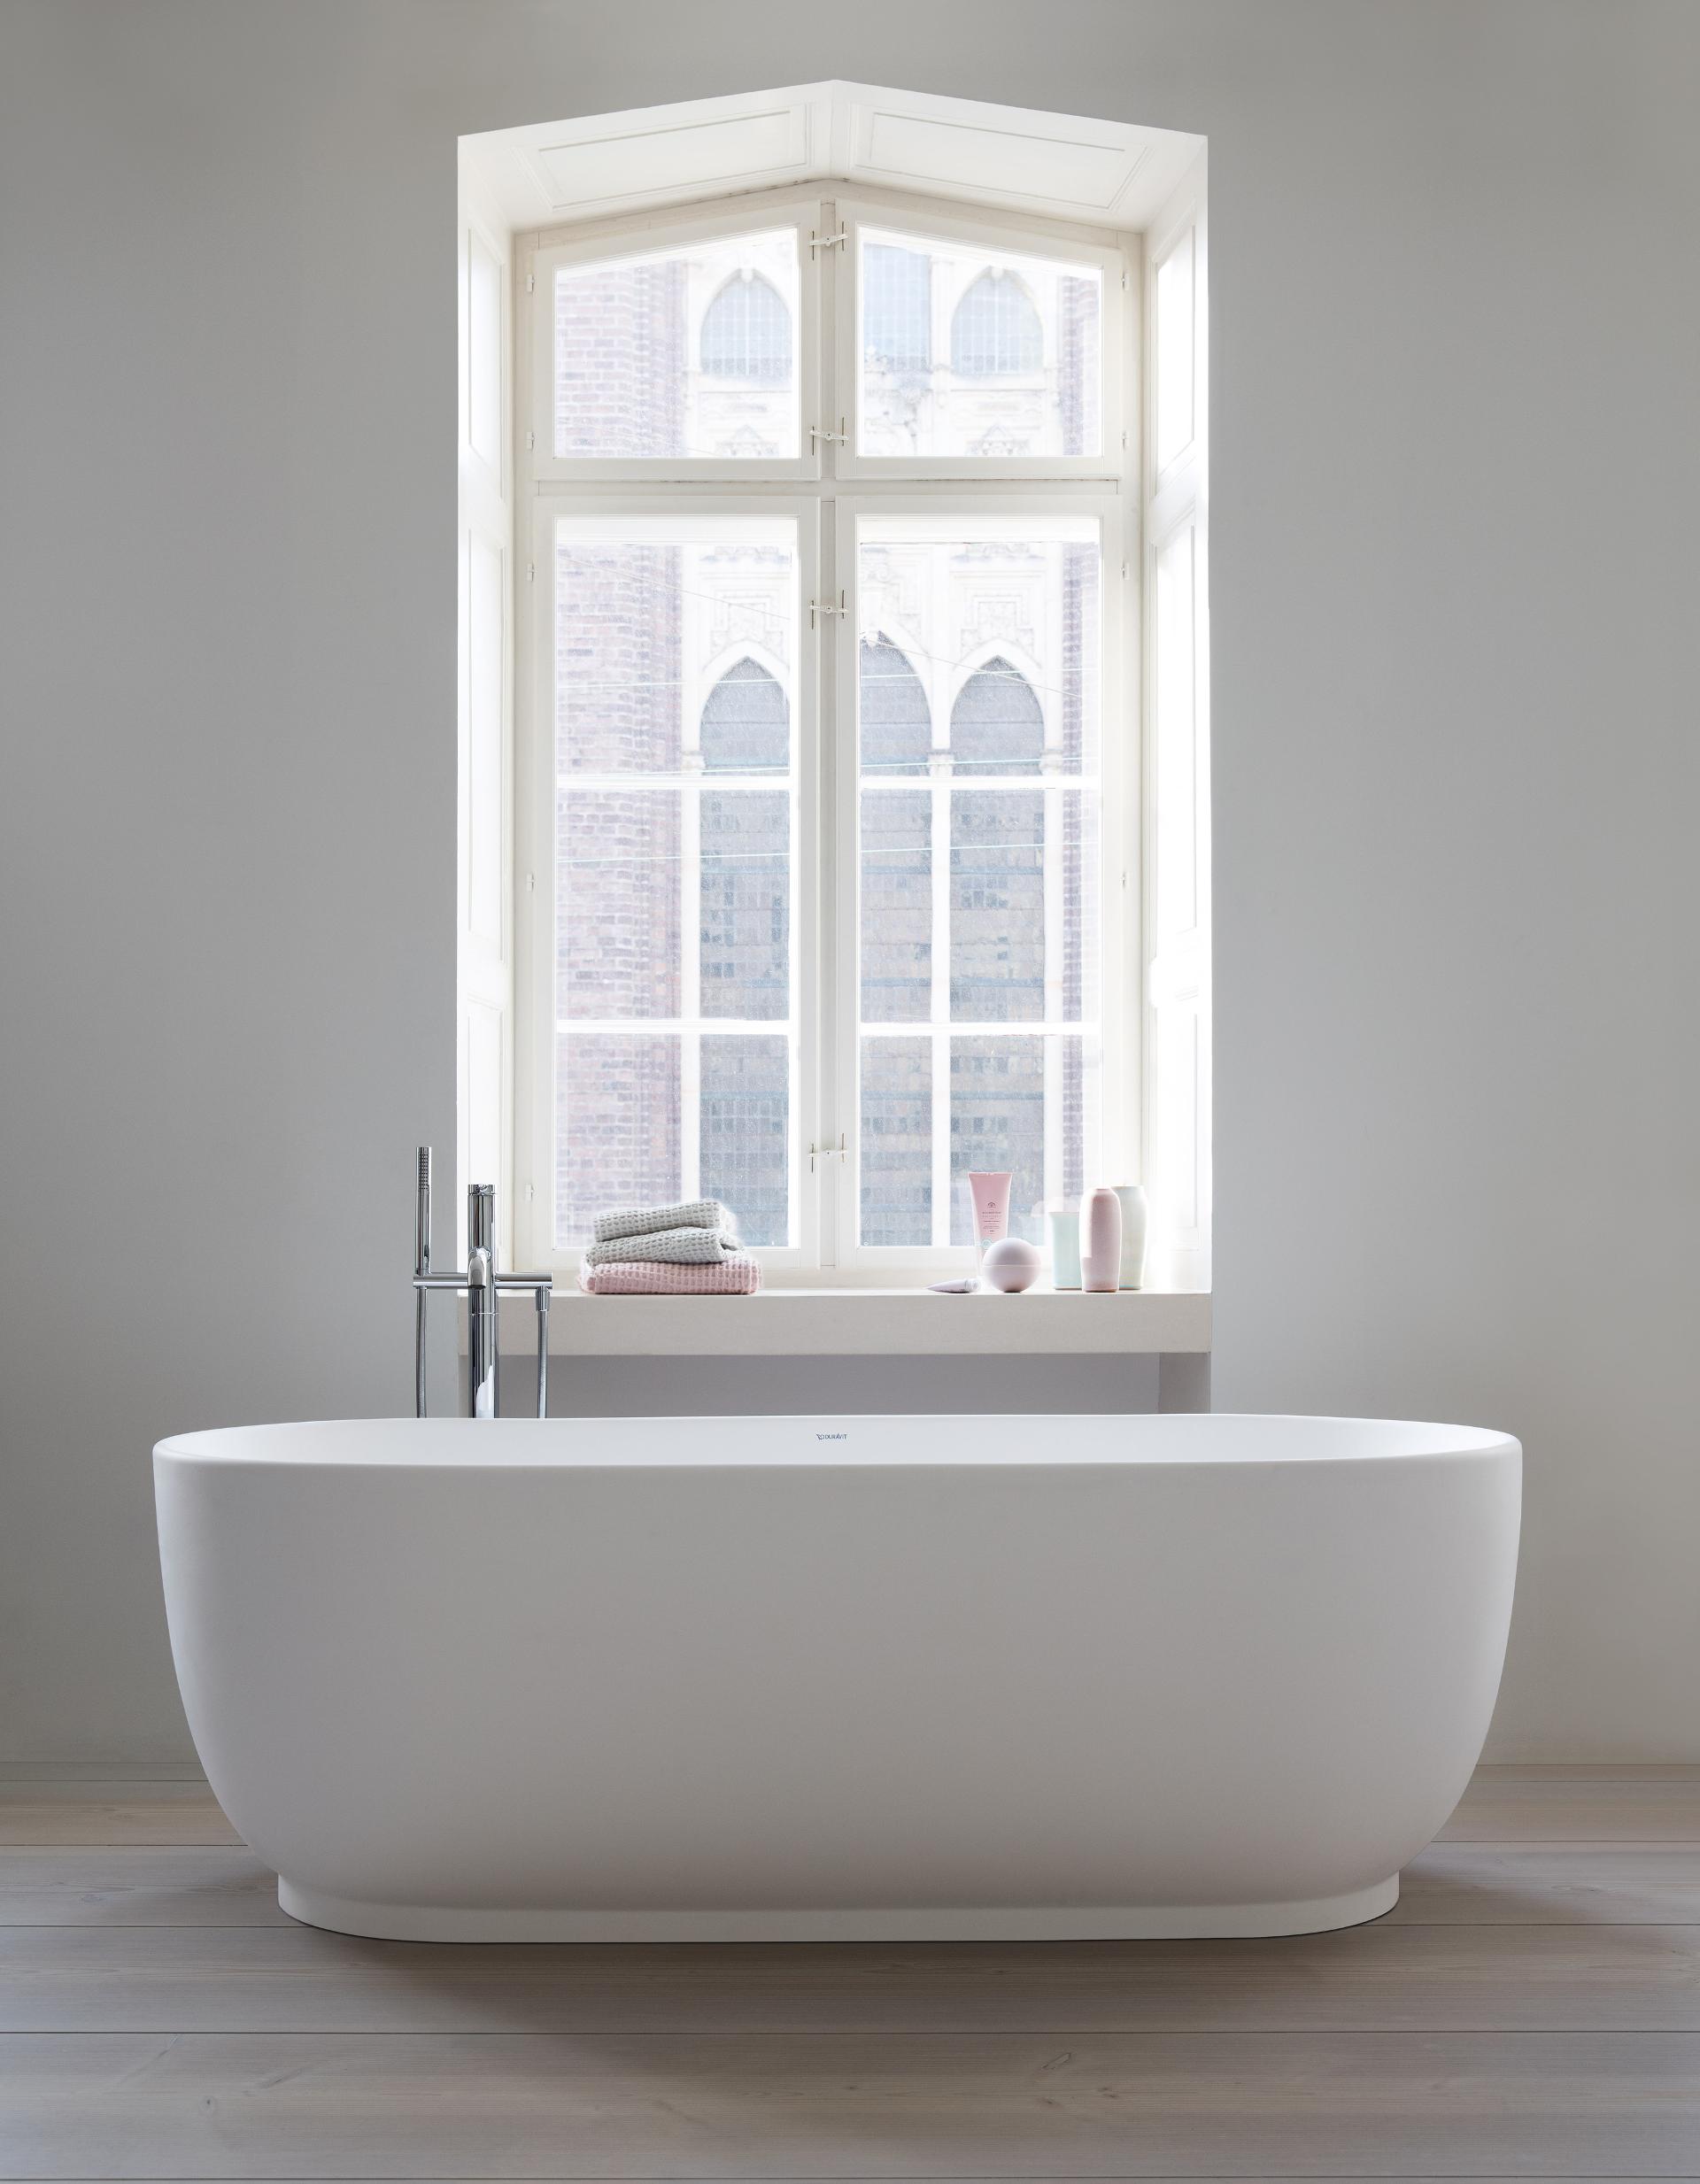 Freestanding Luv bathtub in front of a window
